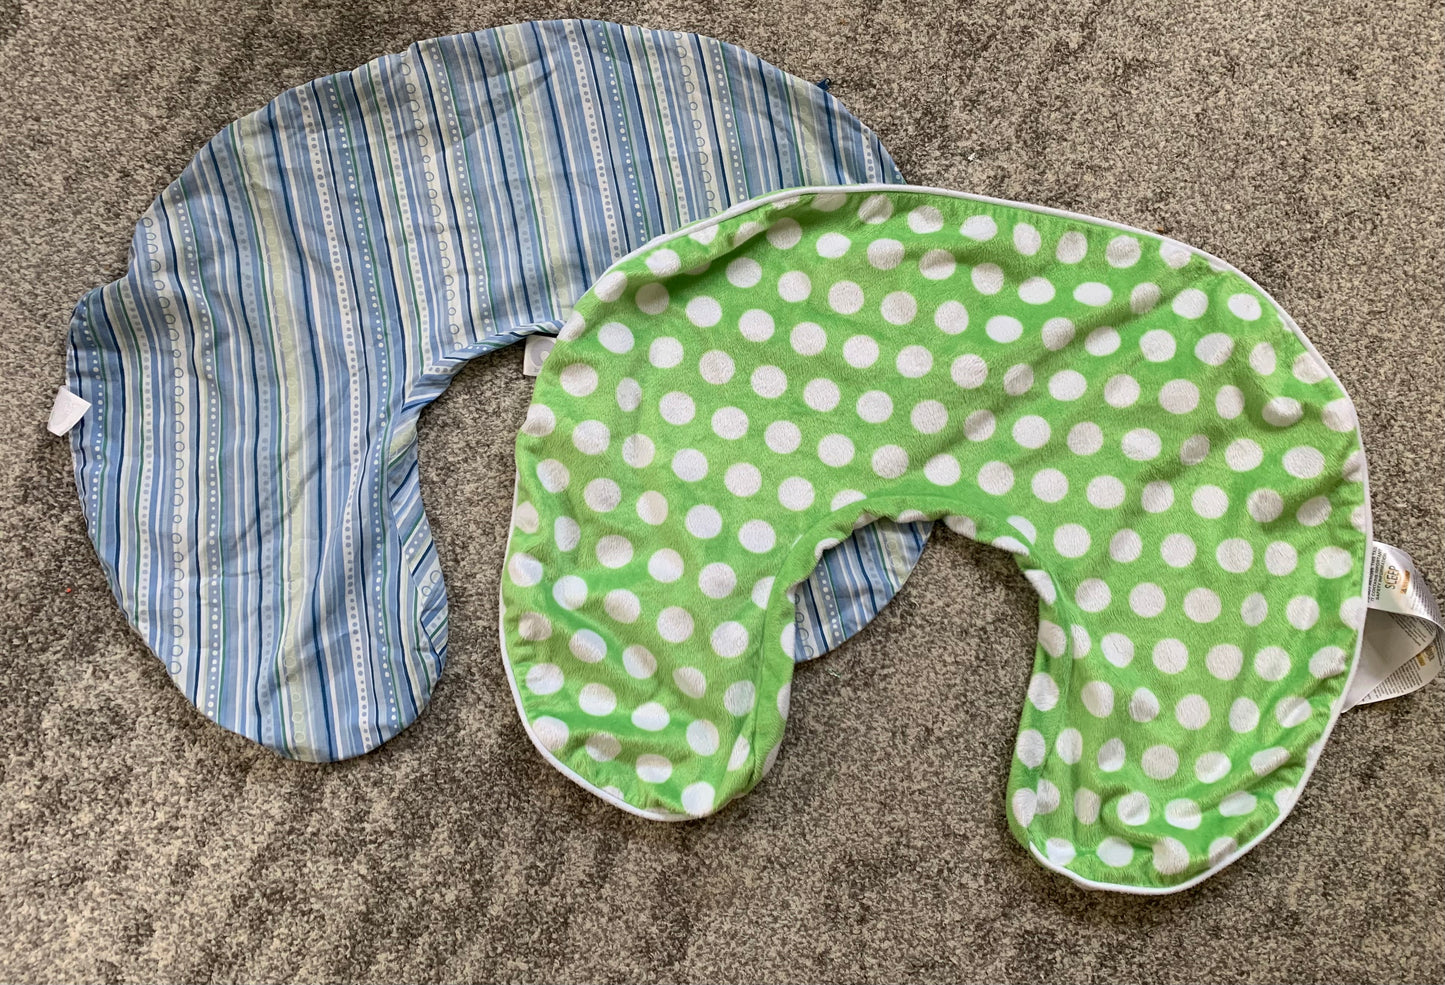 Boppy Removable Covers 2 packs Blue Green Minky